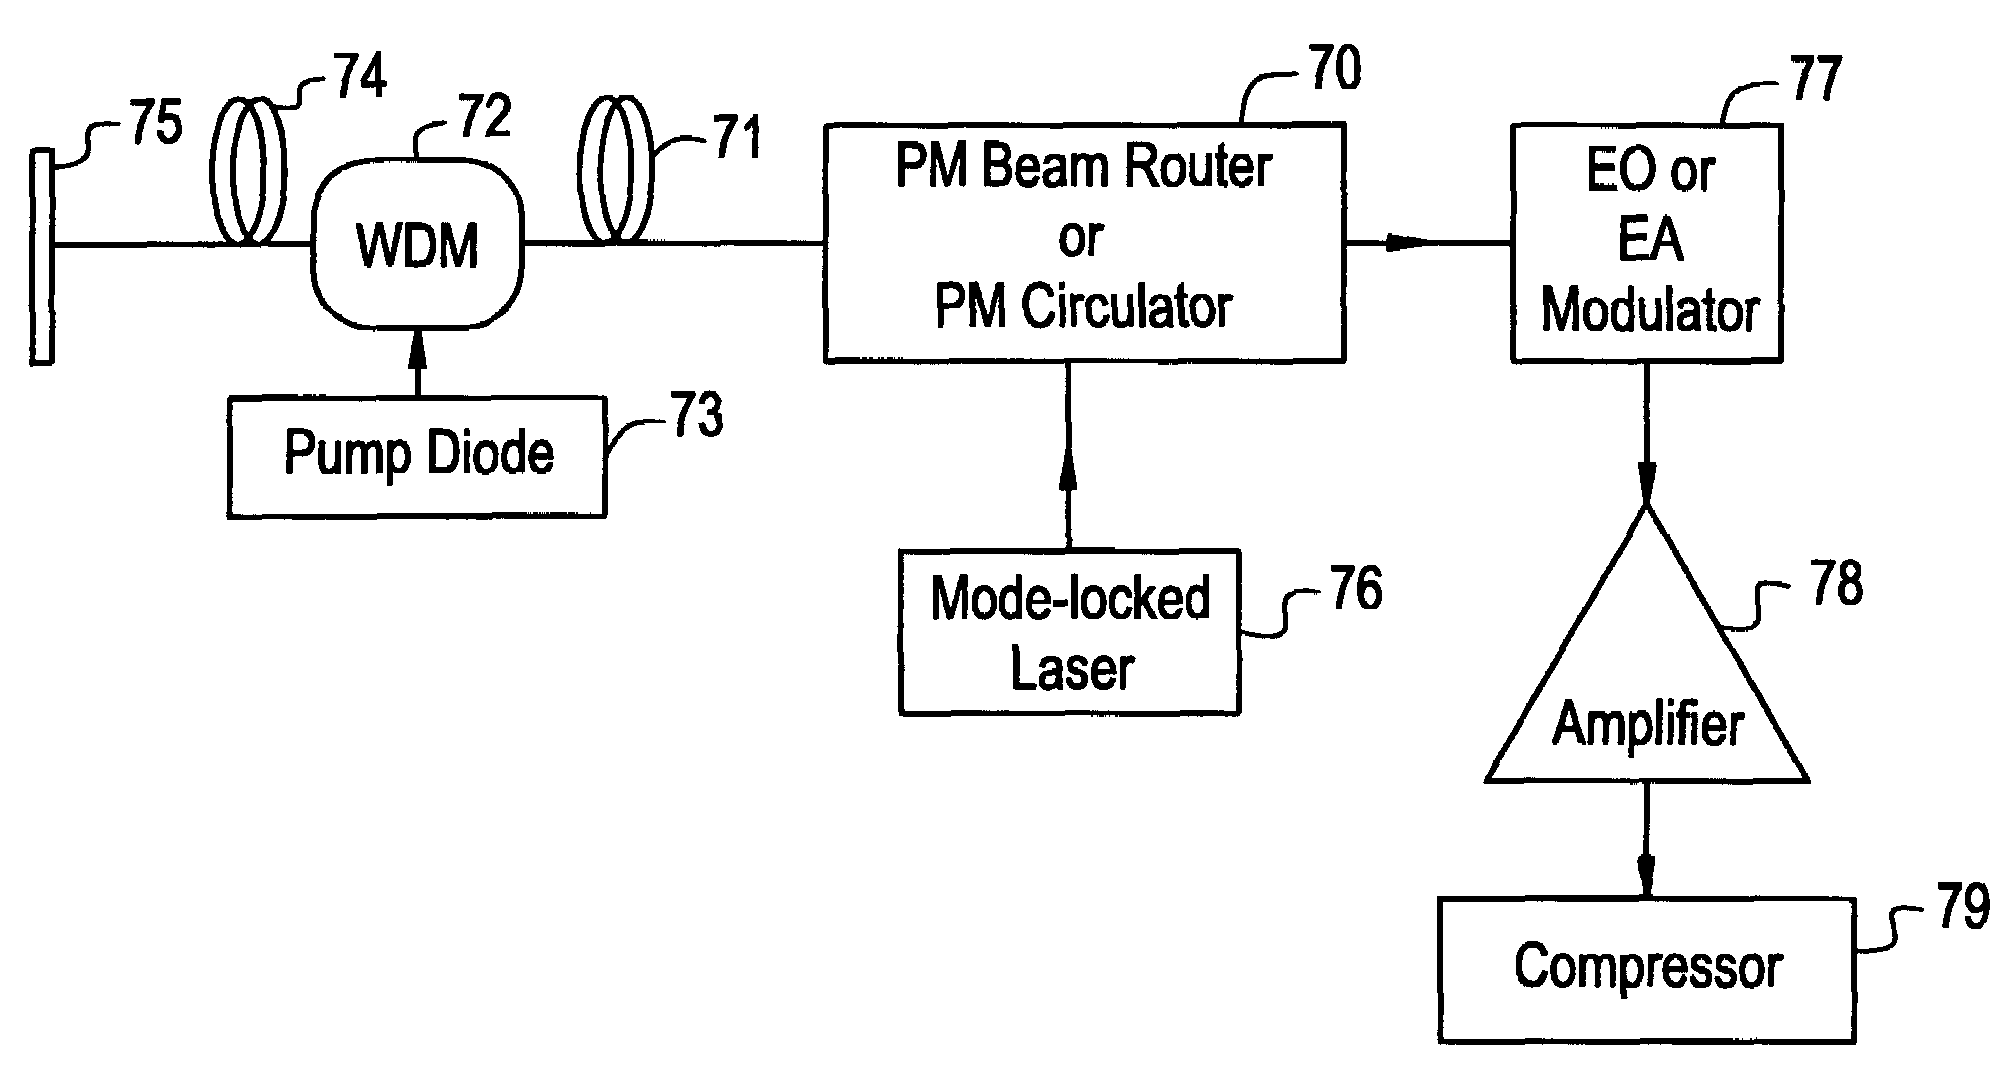 High power fiber chirped pulse amplification system utilizing telecom-type components